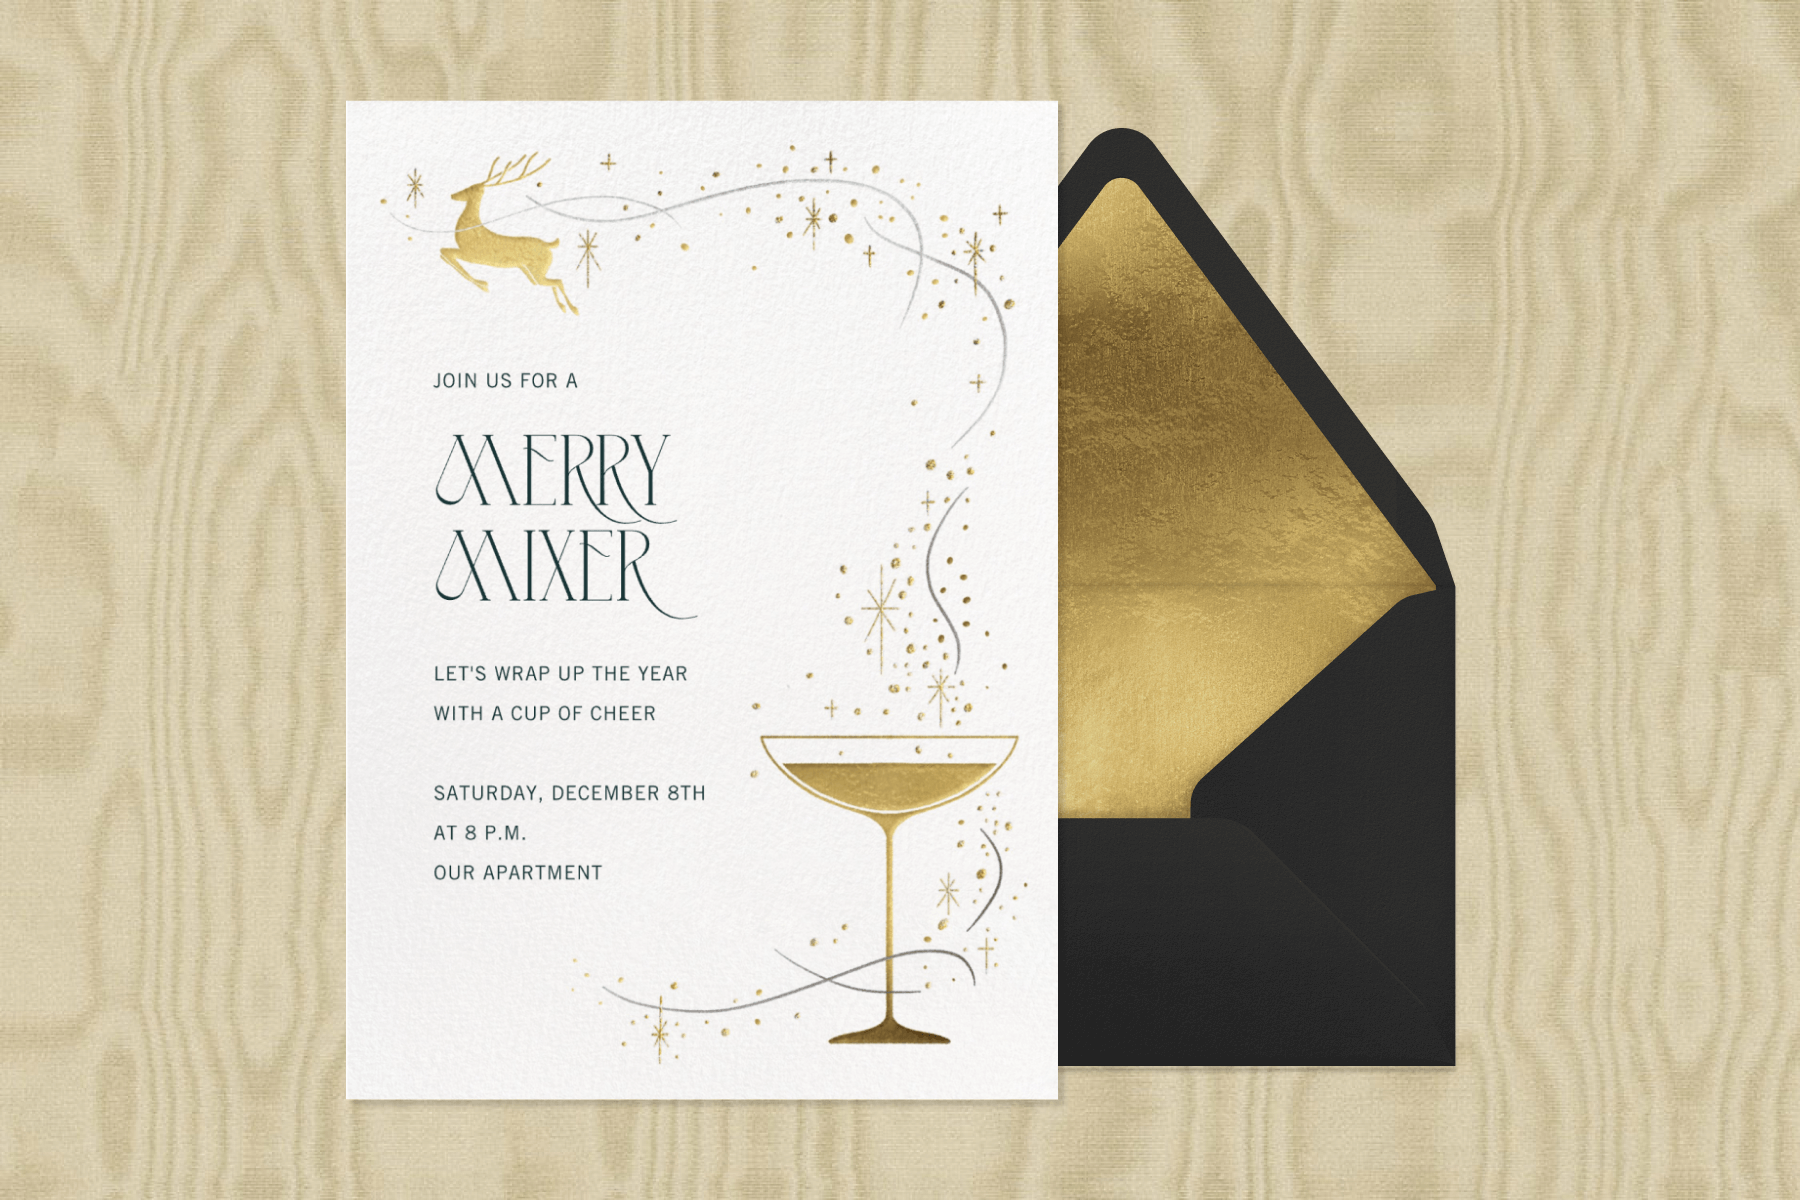 An invitation for a “merry mixer” has a delicate gold illustration of a small deer flying away from a coupe glass leaving stardust in its wake.